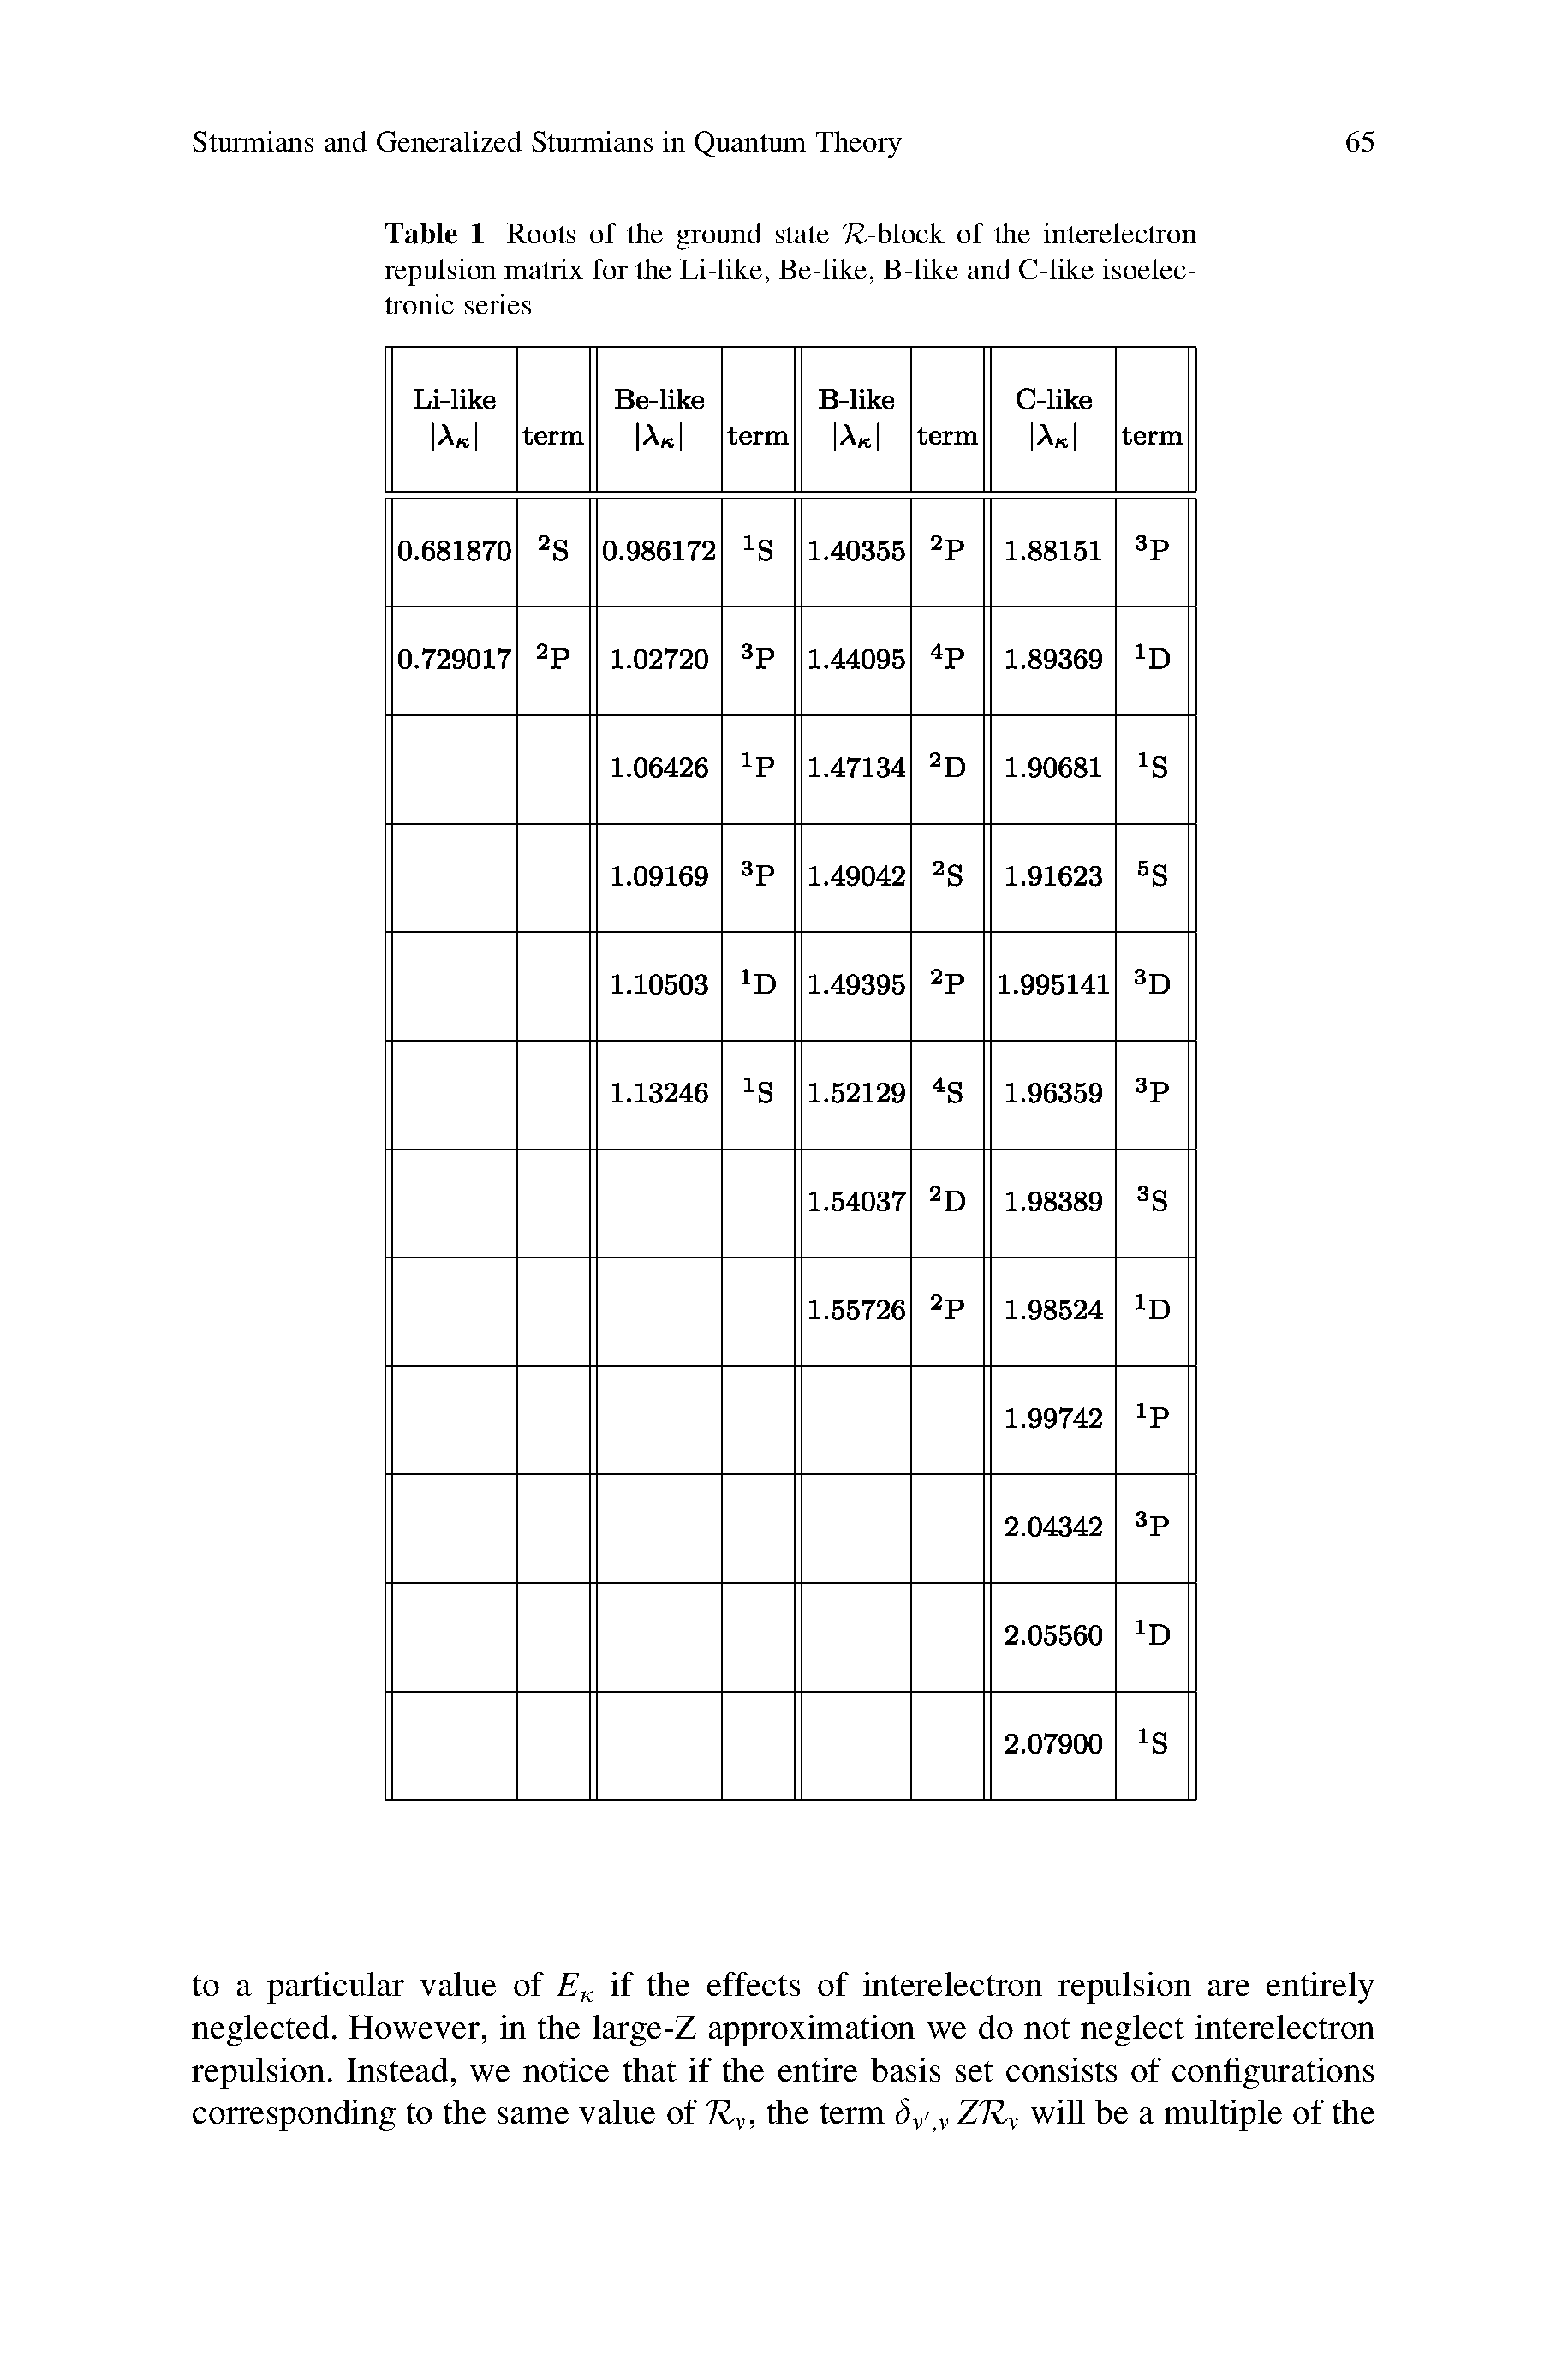 Table 1 Roots of the ground state 77-block of the interelectron repulsion matrix for the Li-like, Be-like, B-like and C-like isoelec-tronic series...